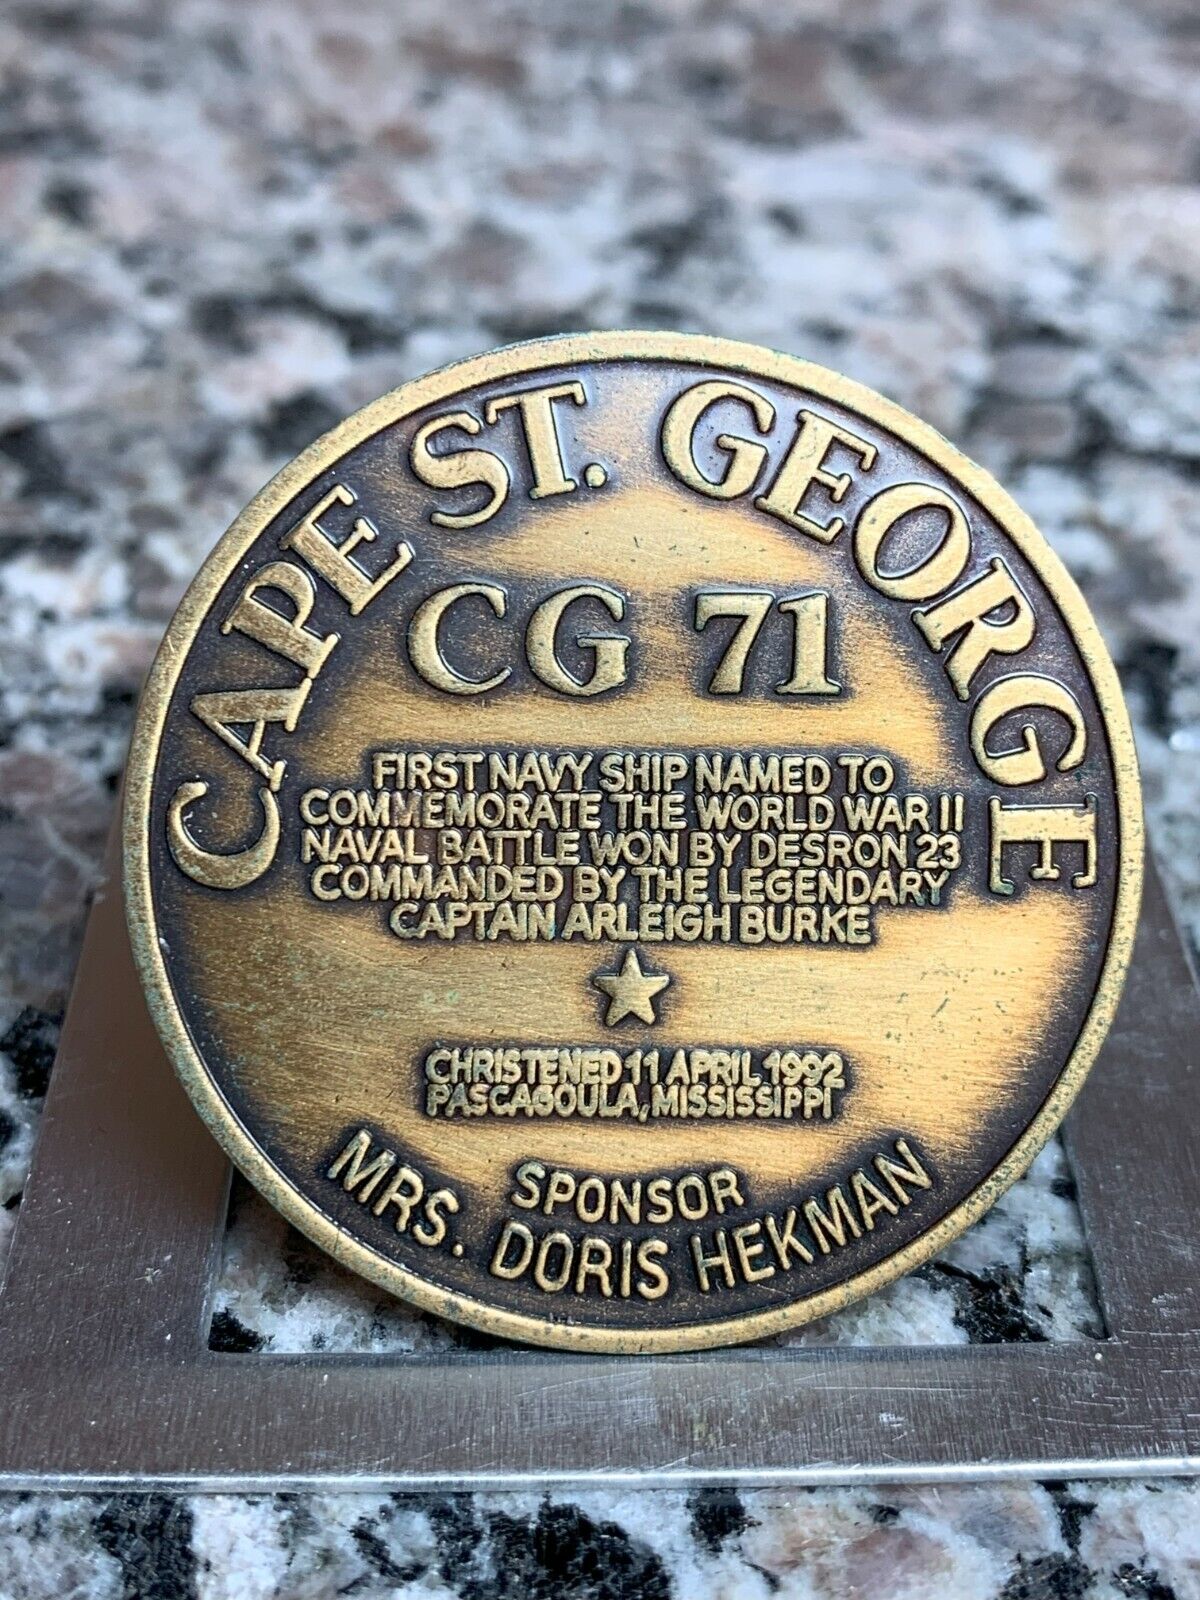 USS Cape St. George CG 71 christened medal coin Pascagoula, Miss.